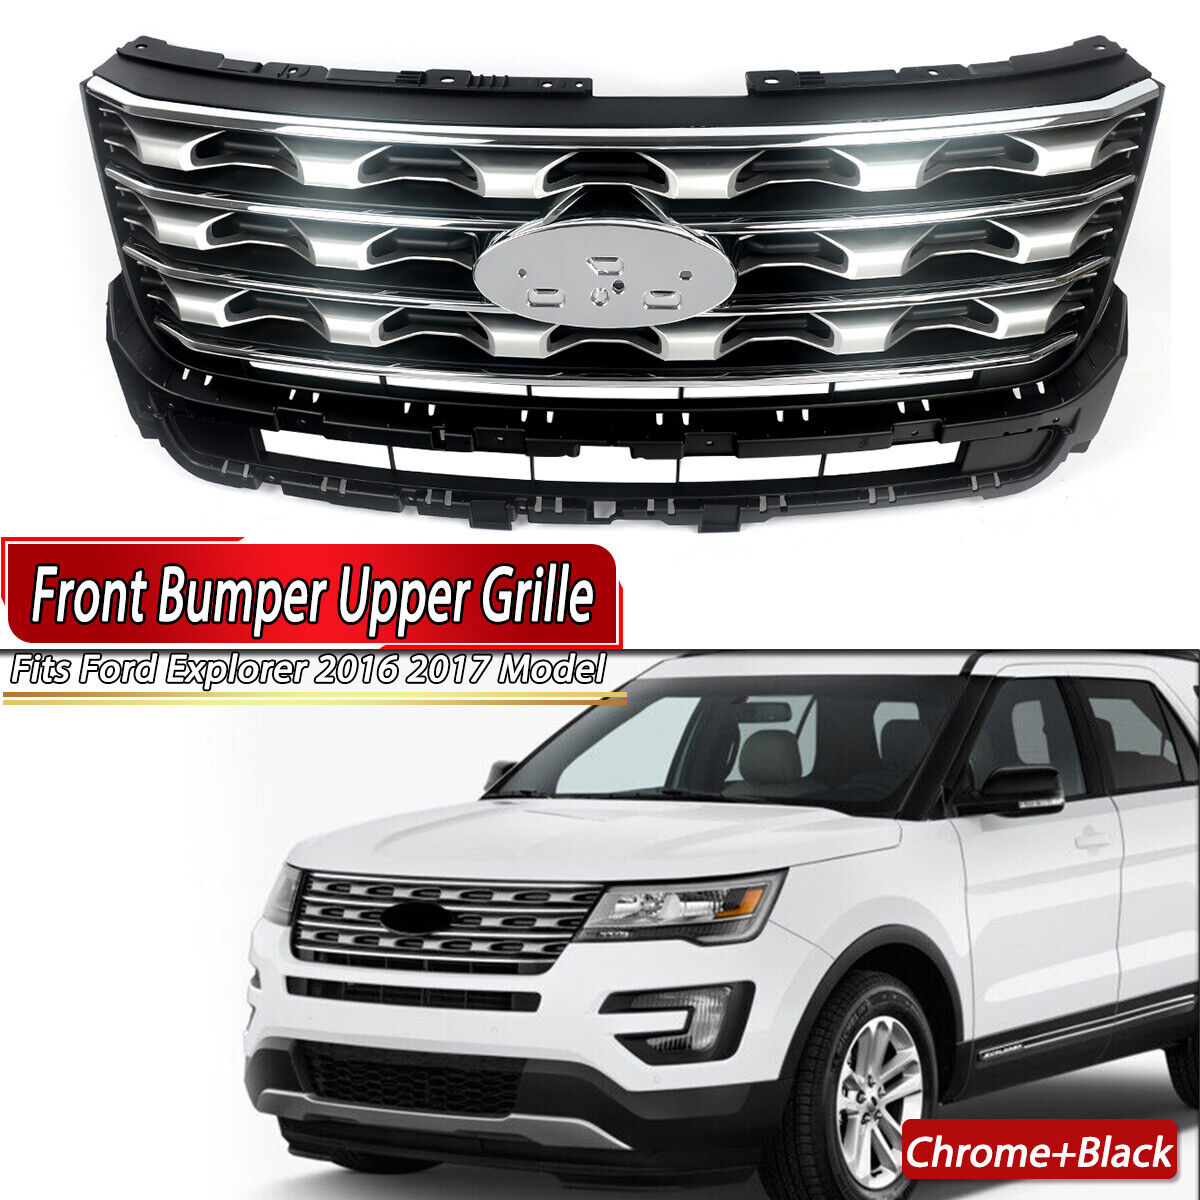 1X Front Bumper Grill Upper Grille Chrome+Black ABS Fits Ford Explorer 2016 2017